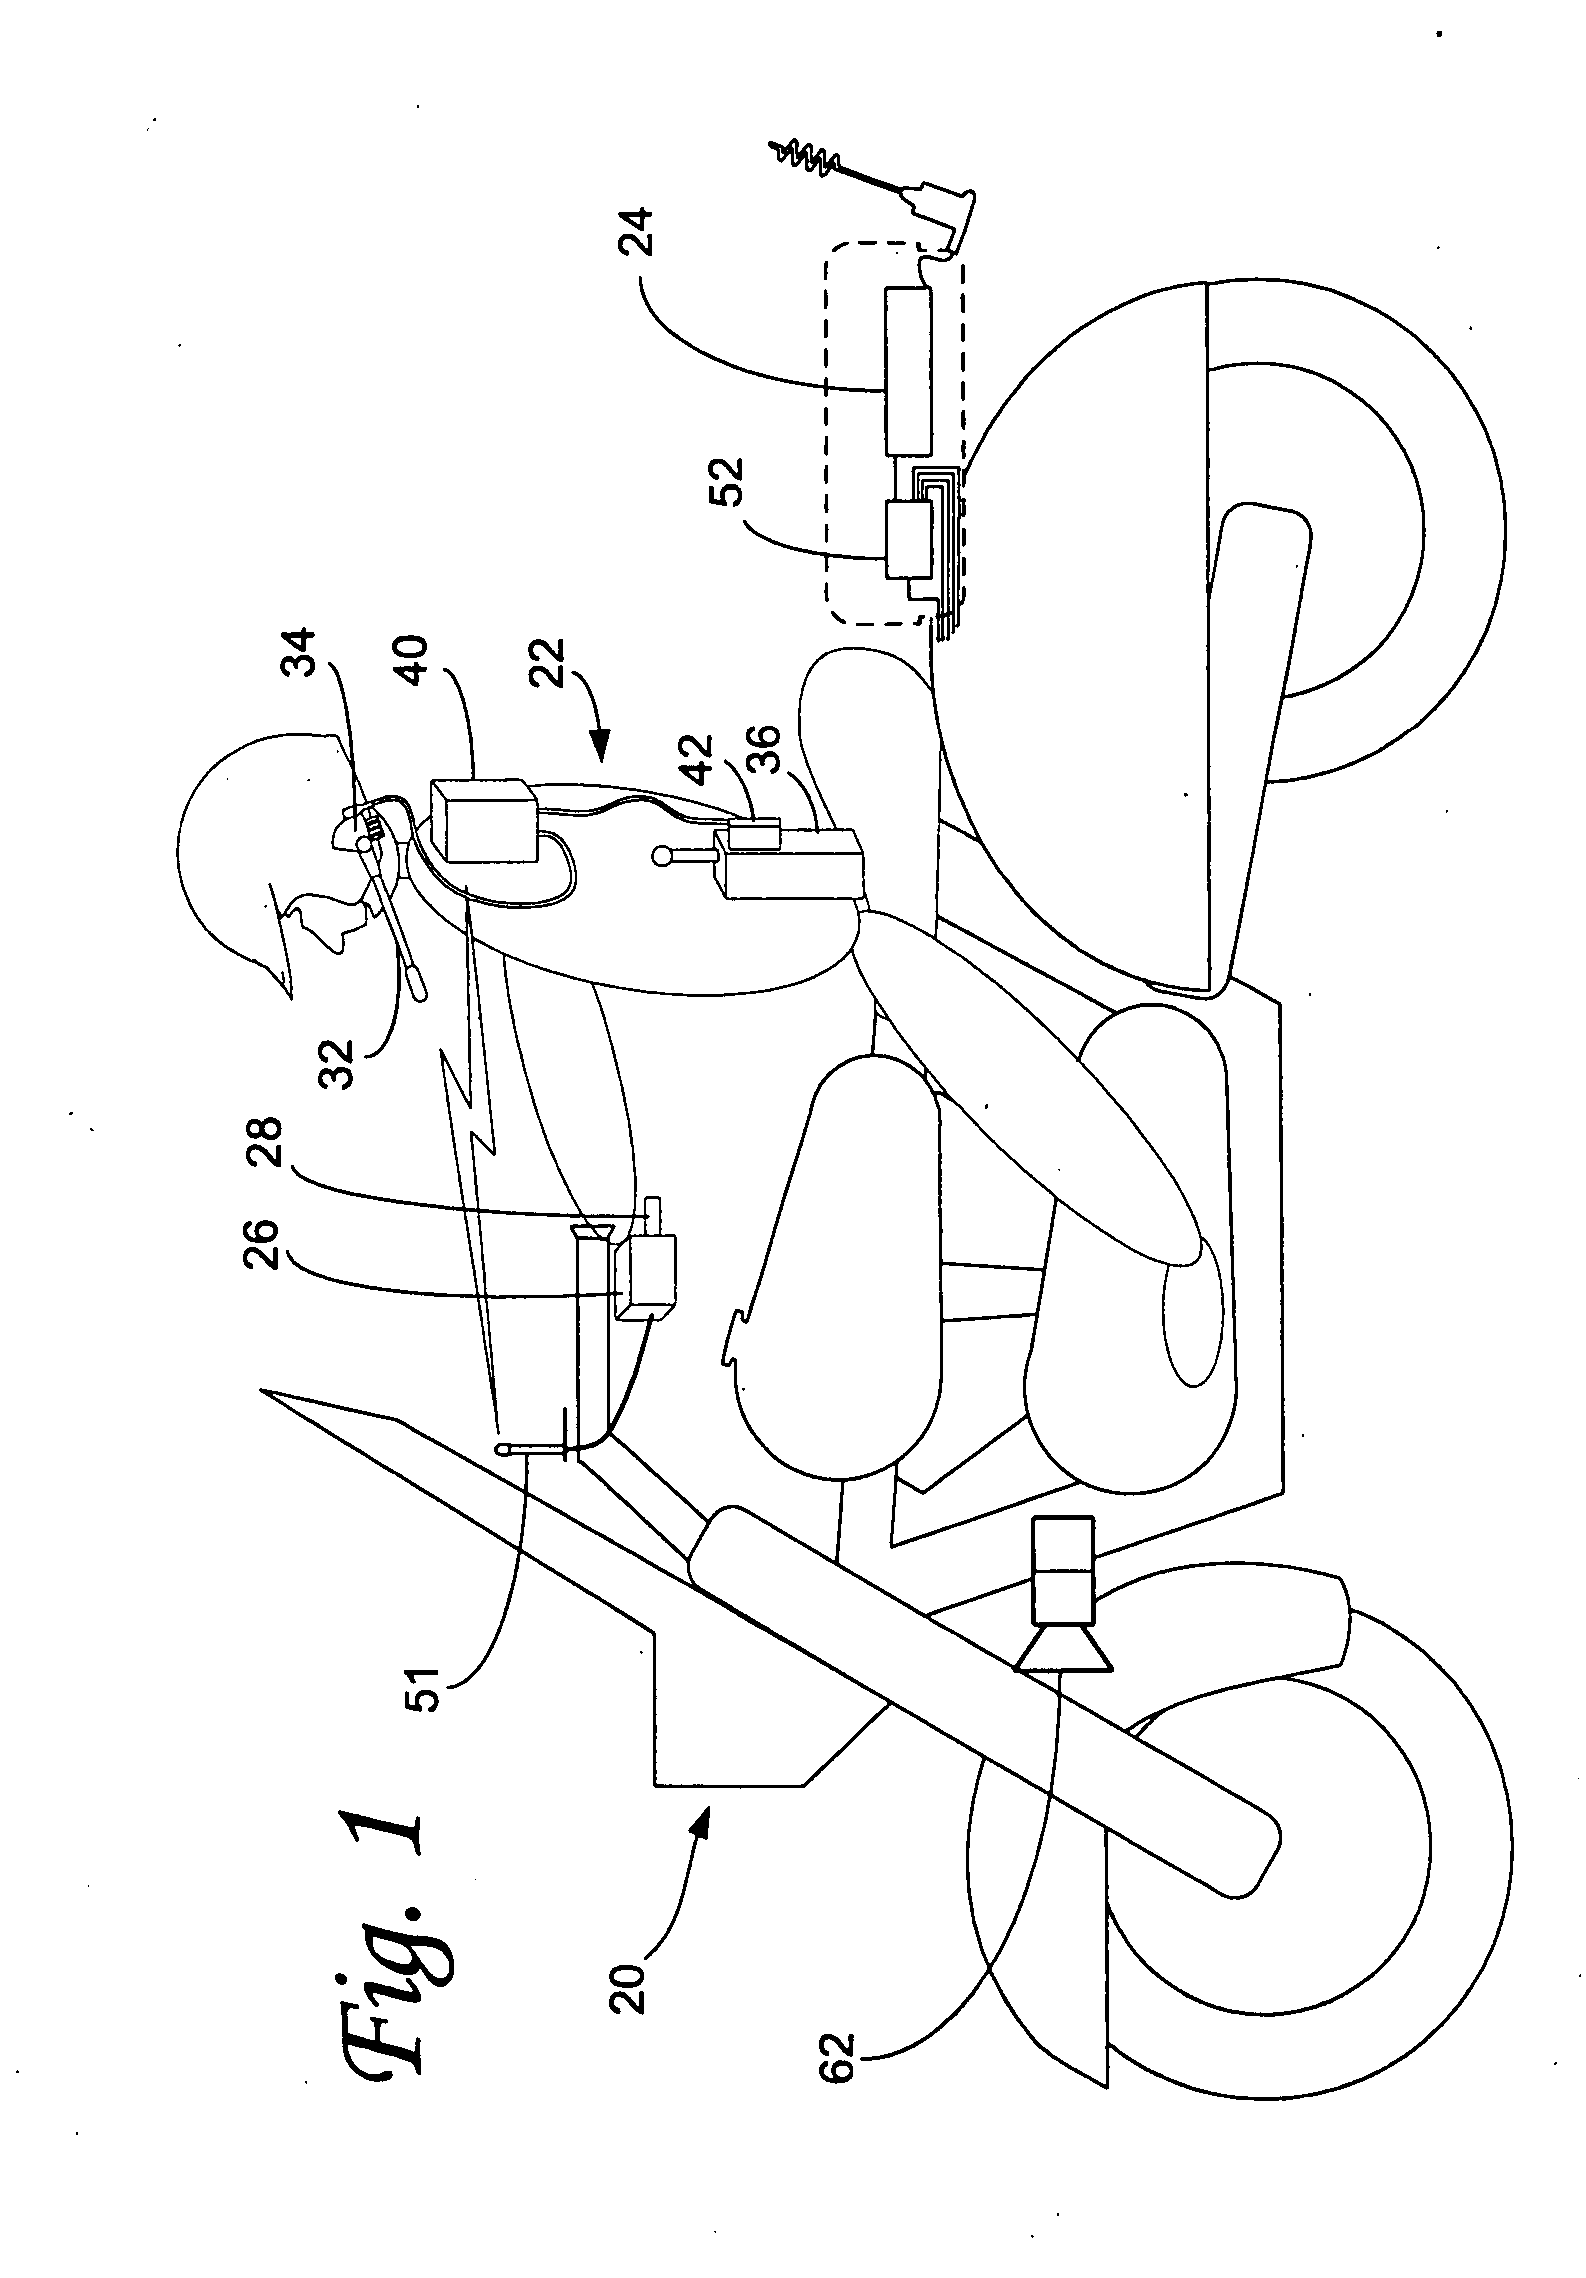 Radio and public address accessory system with wireless interface